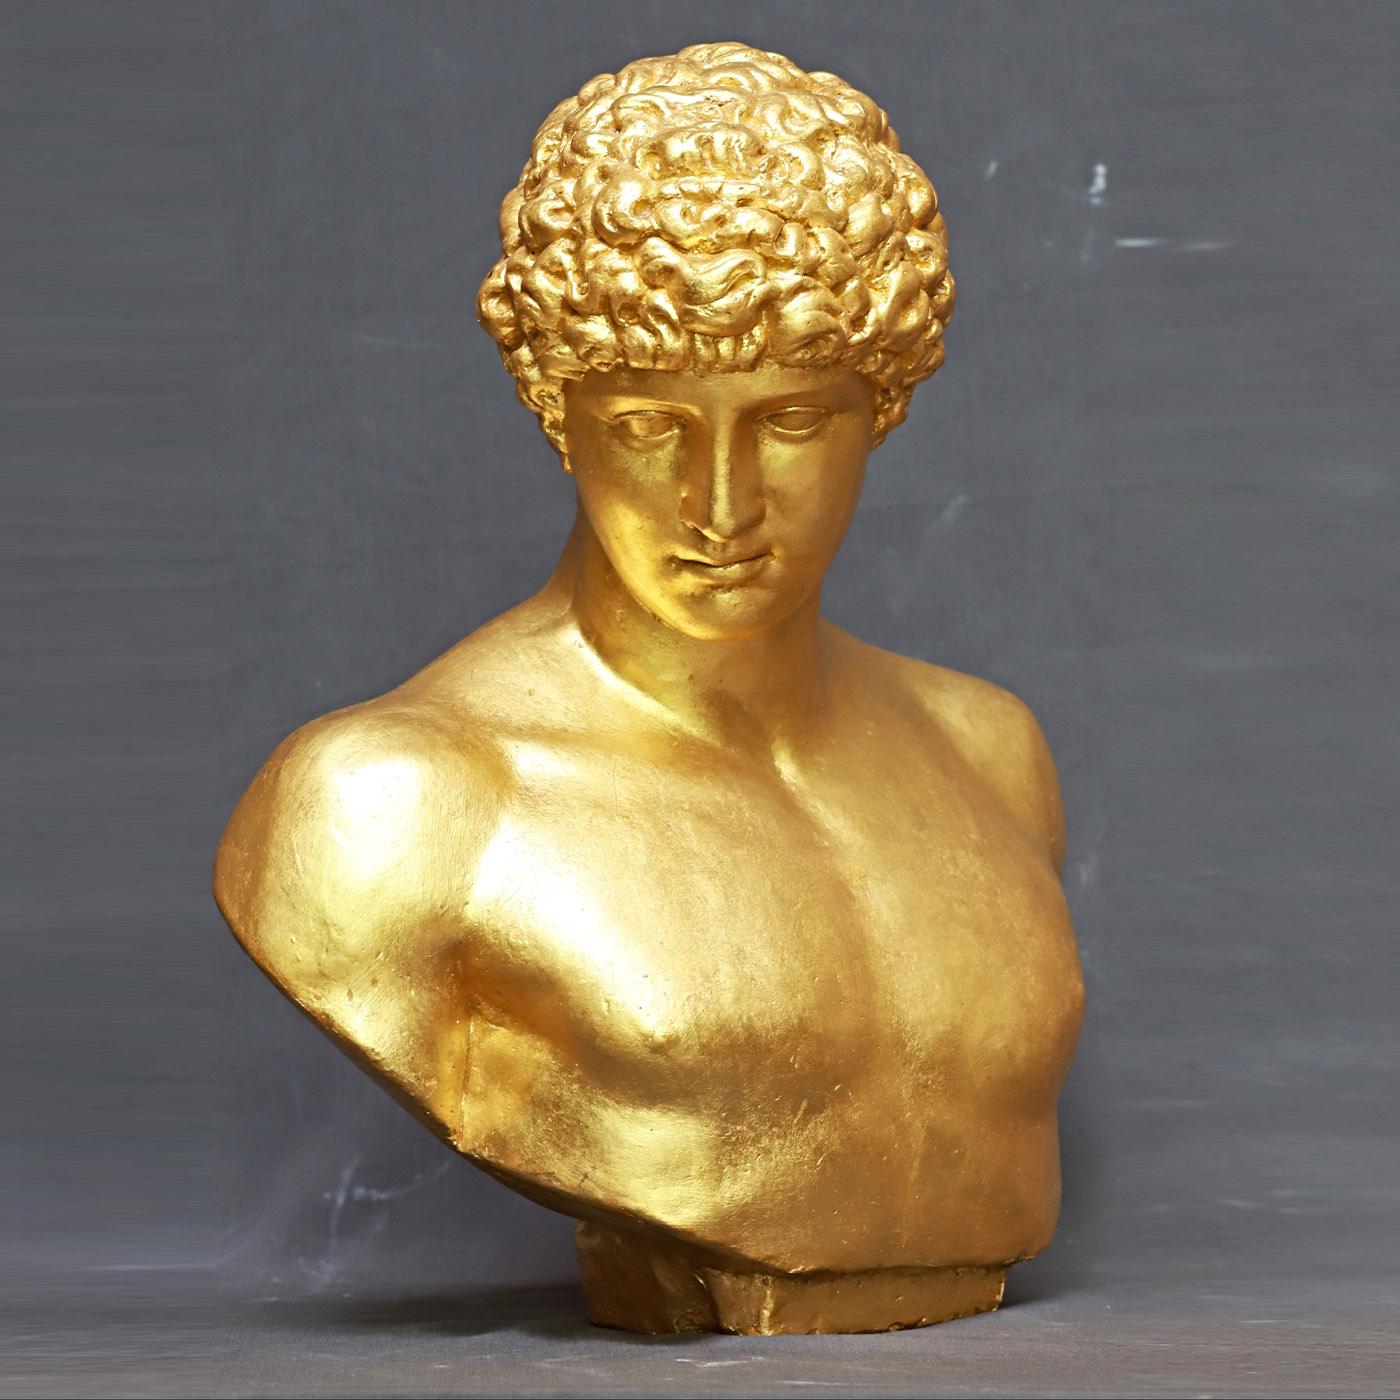 Crafted using a mold the Romanelli family counts among its historical collection, this sculpture depicts the bust of Antinous - a possible lover of the Roman emperor Hadrian - who died under suspicious circumstances. An entire artisan process is